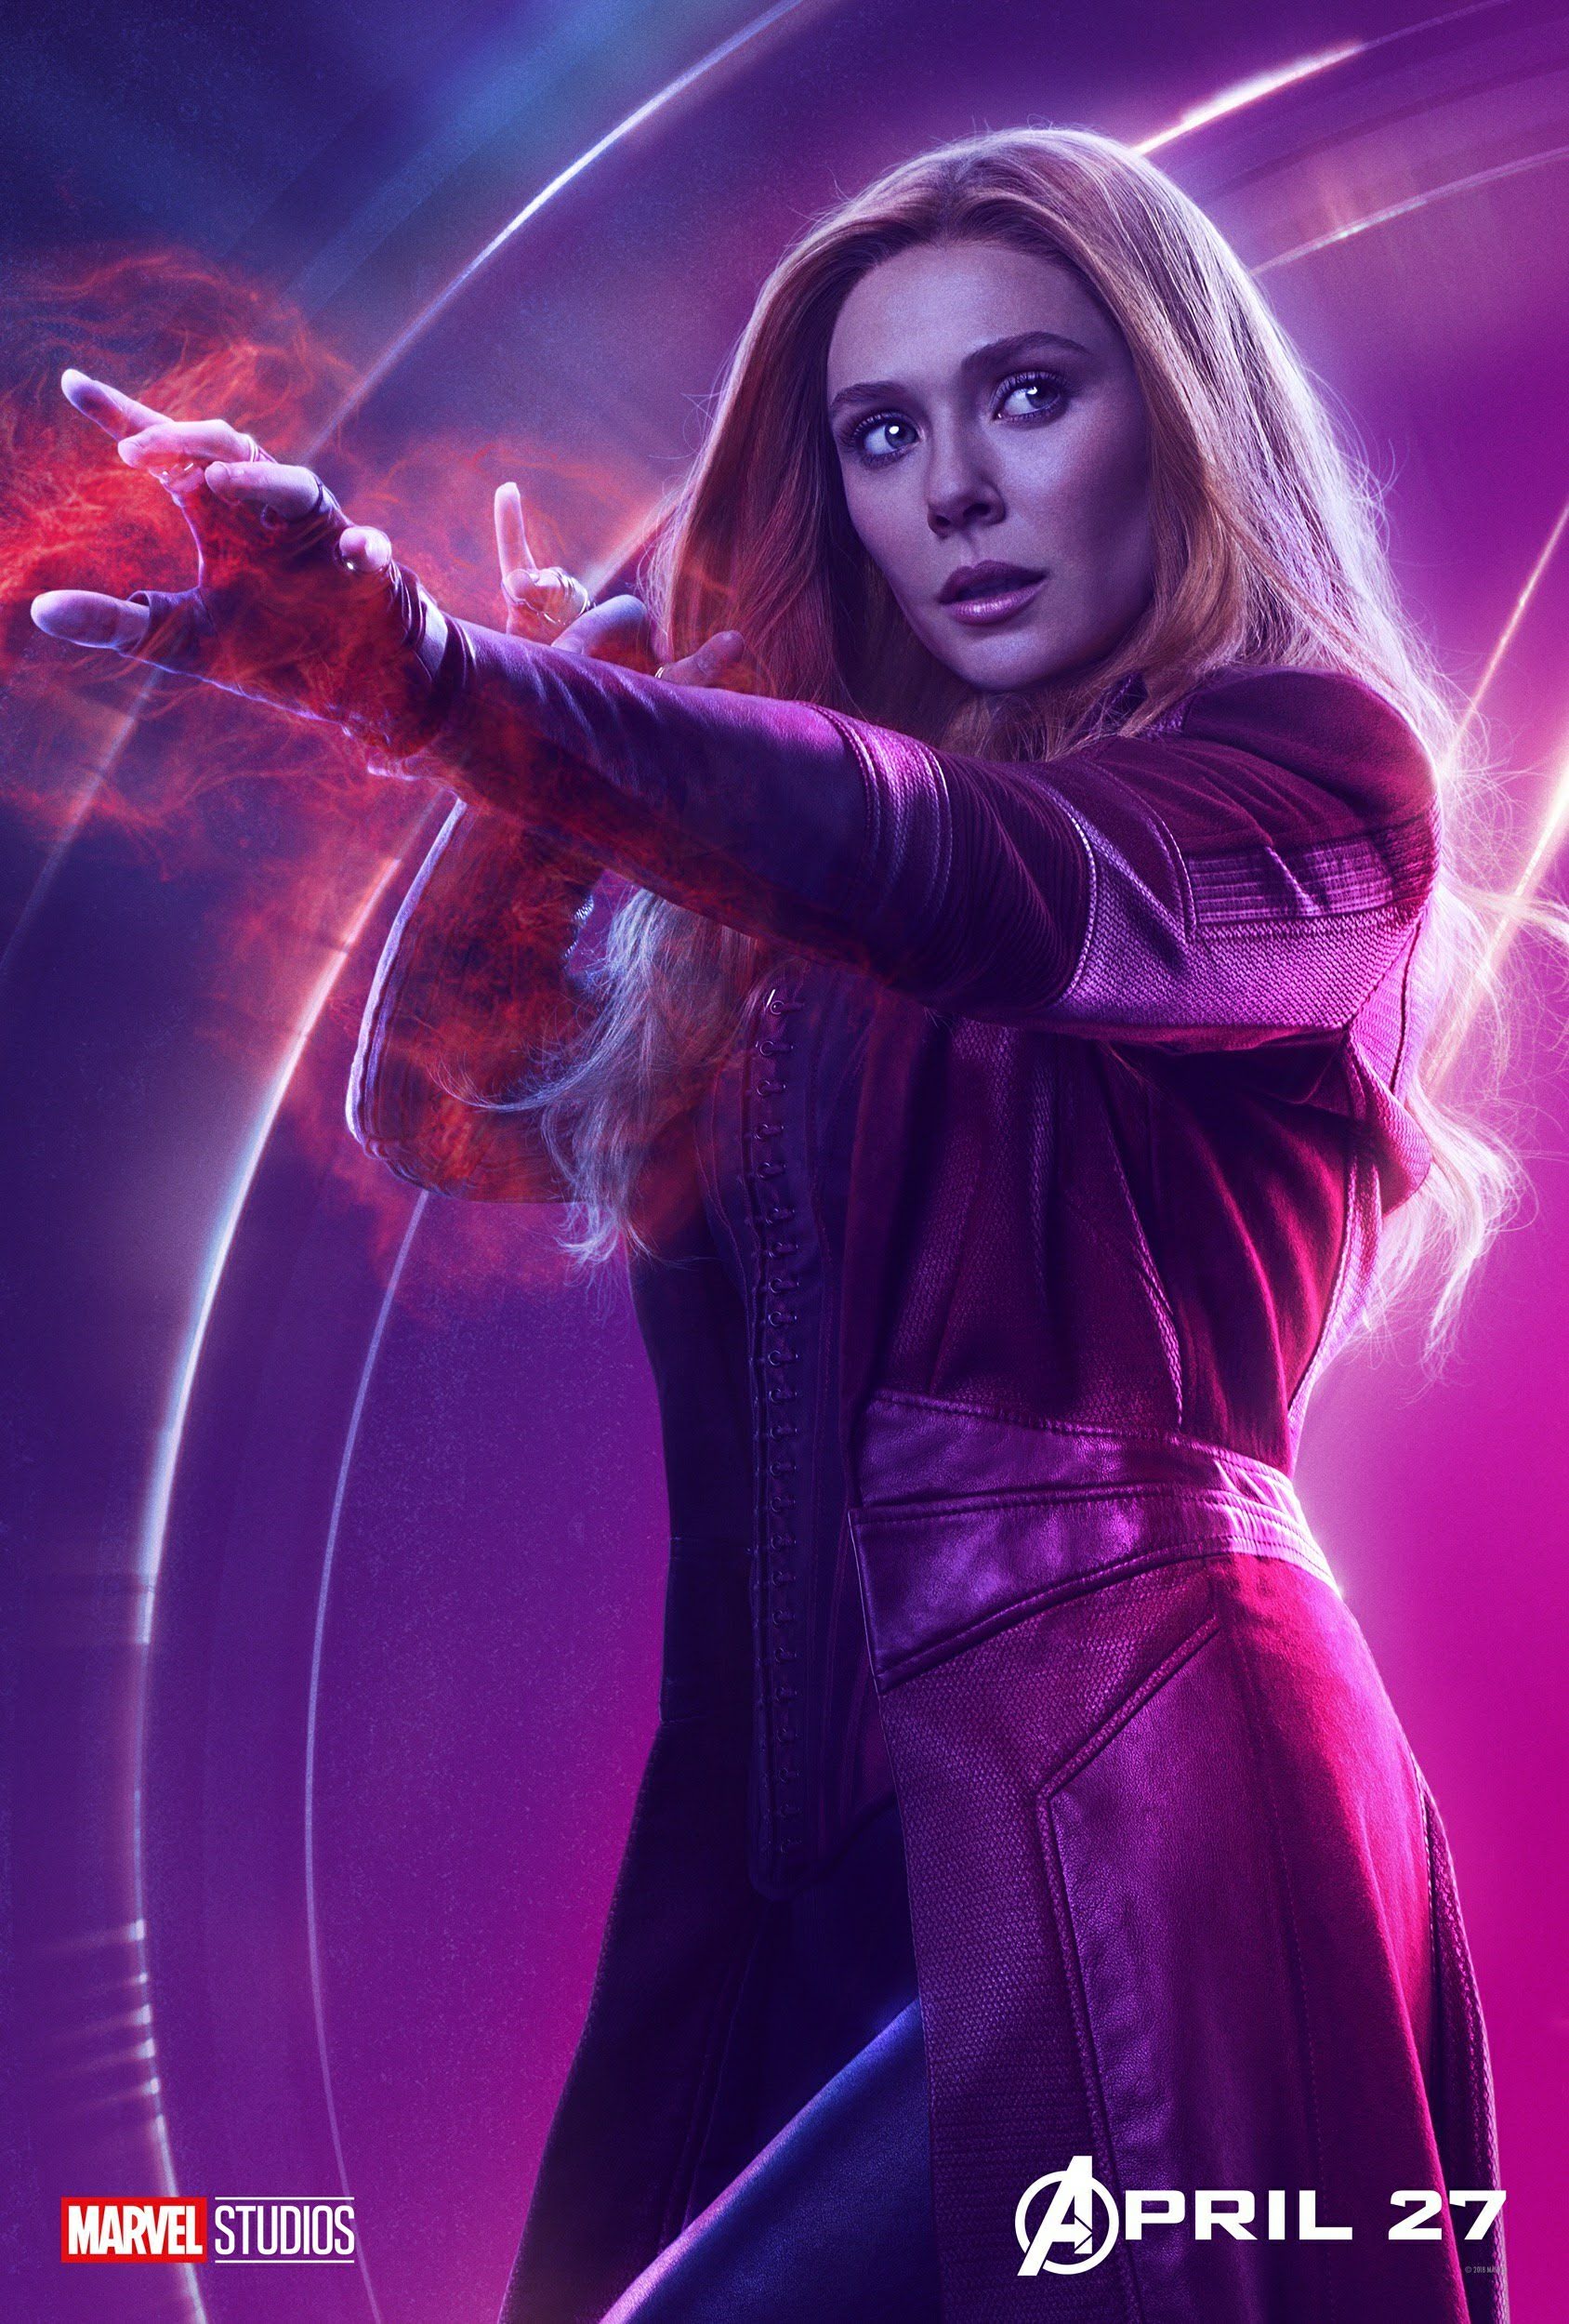 Scarlet Witch Ultimate Marvel Cinematic Universe Wikia Fandom